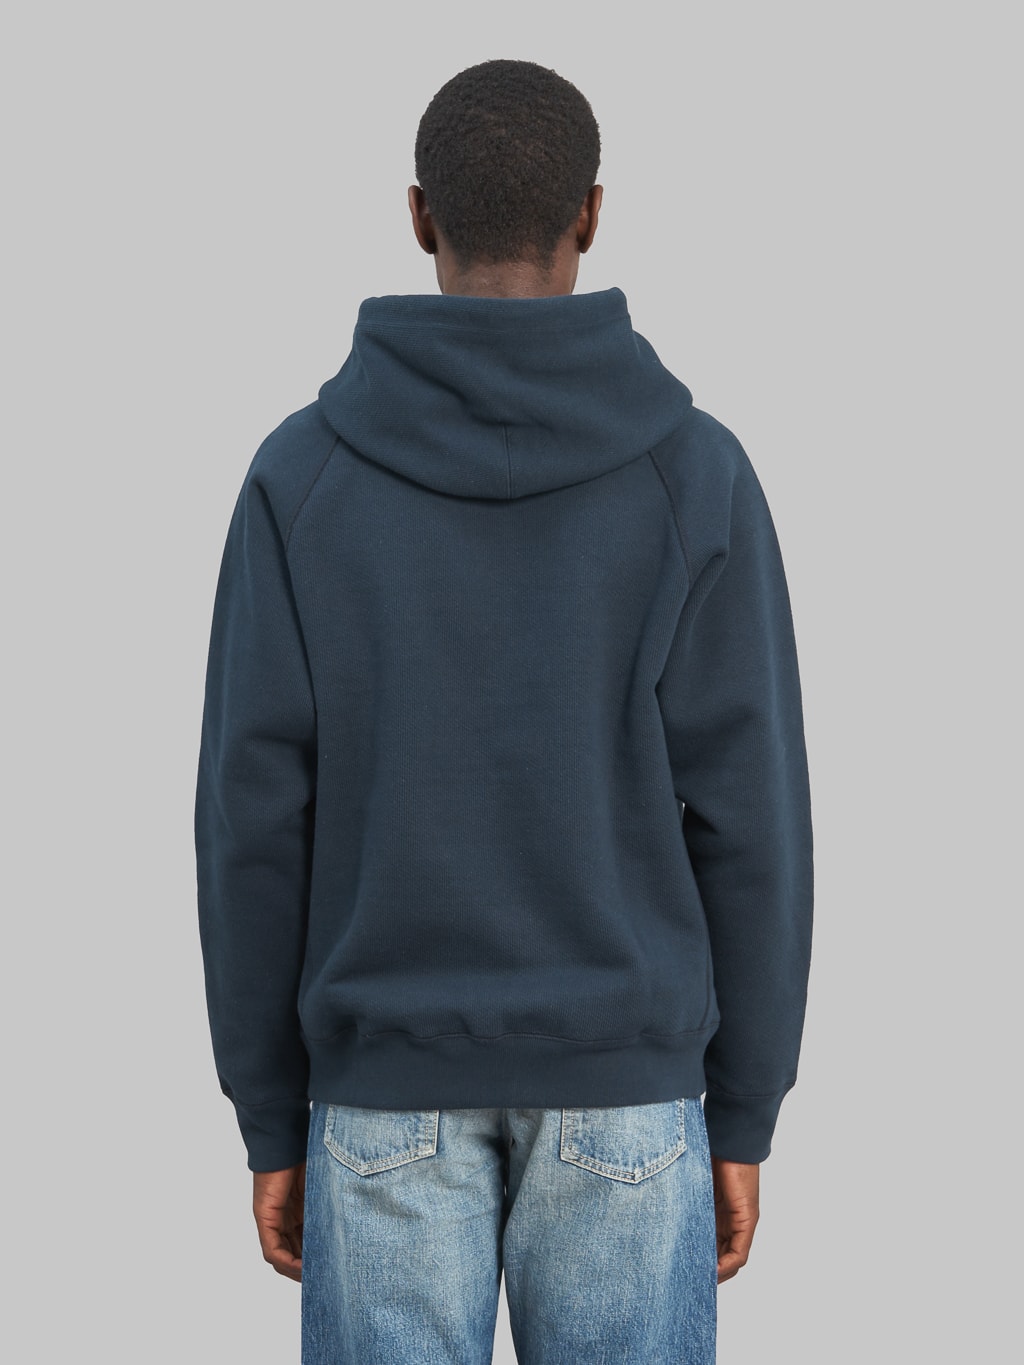 Wonder Looper Pullover Hoodie 701gsm Double Heavyweight French Terry Navy